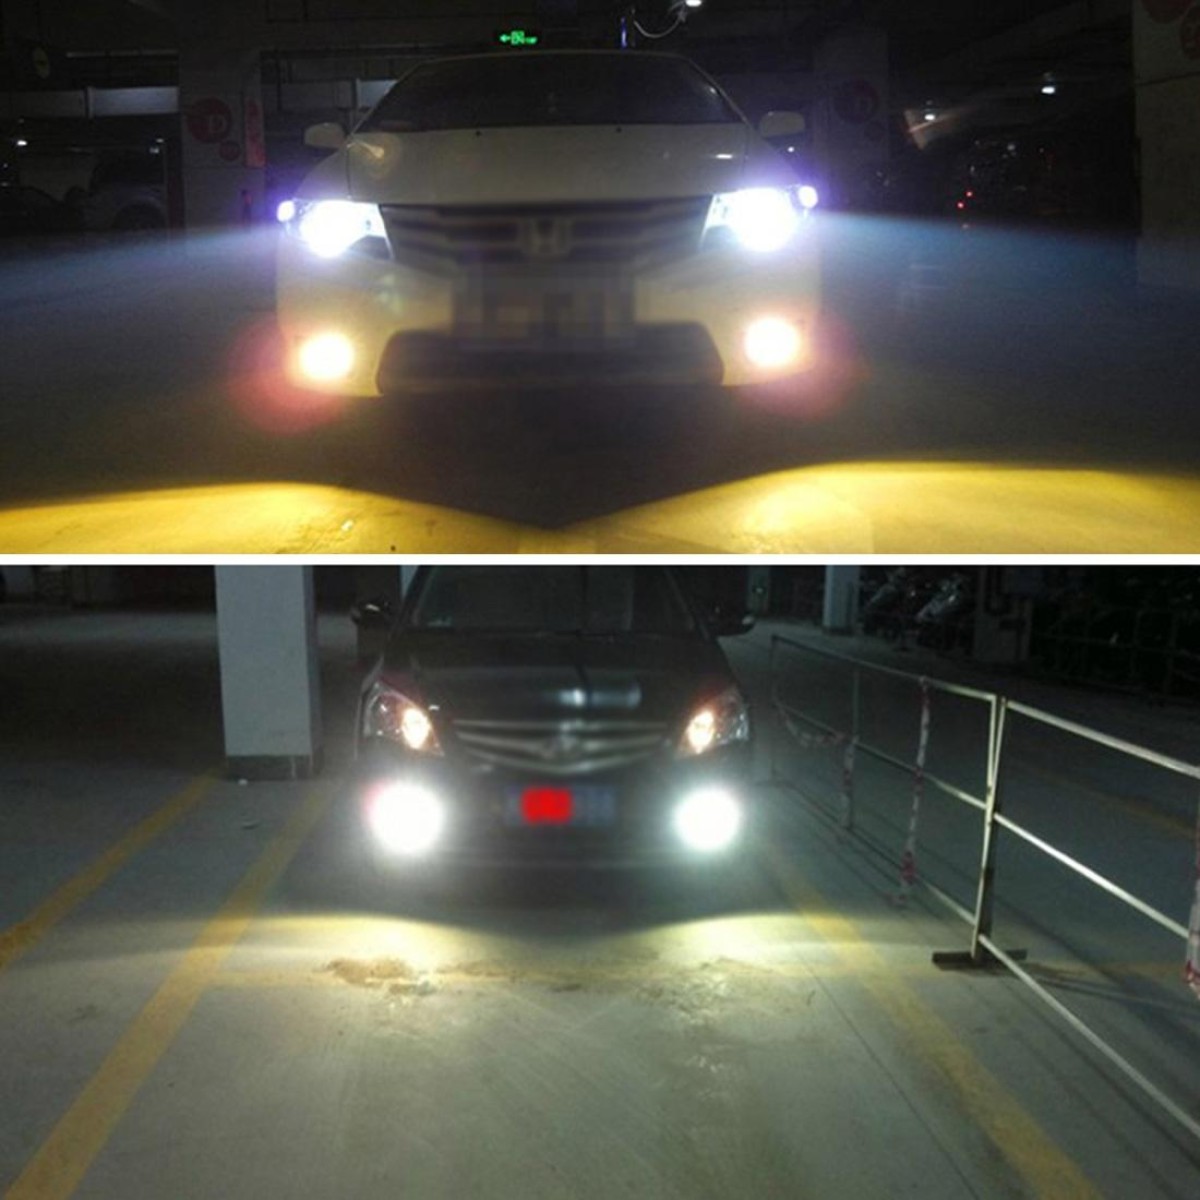 2PCS 35W HB3/9005 2800 LM Slim HID Xenon Light with 2 Alloy HID Ballast, High Intensity Discharge Lamp, Color Temperature: 6000K